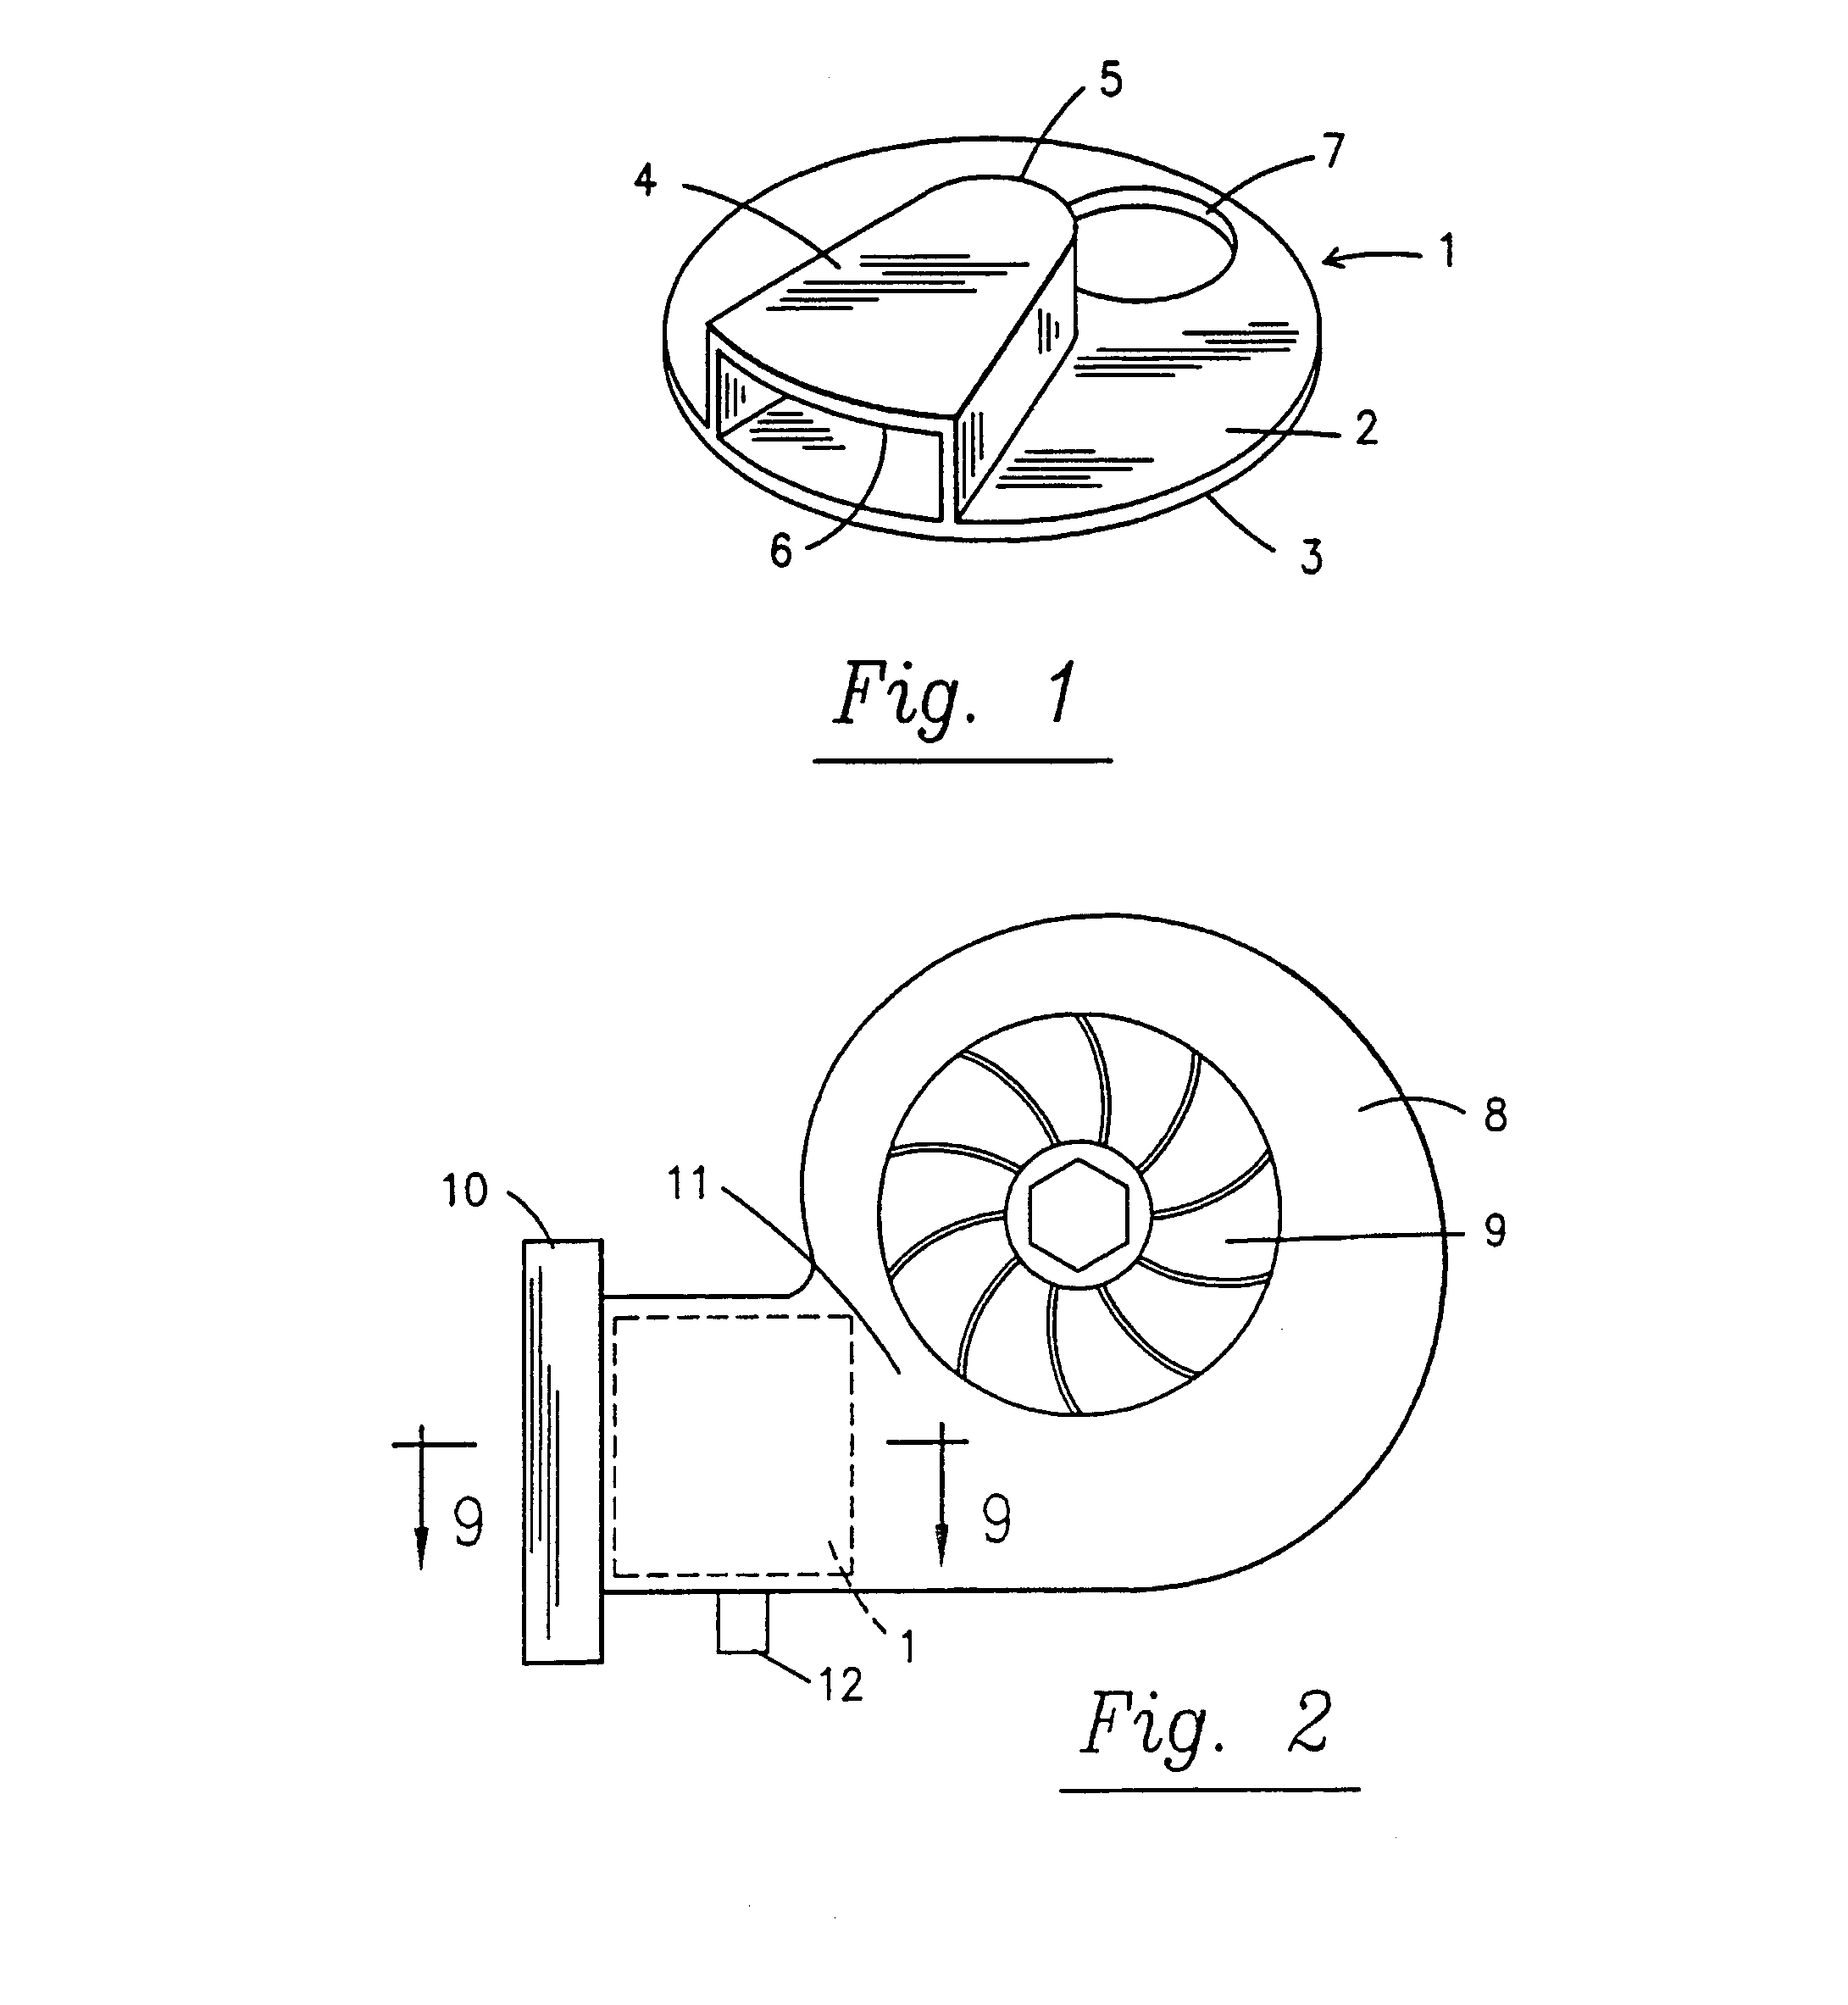 Controlled turbocharger with integrated bypass